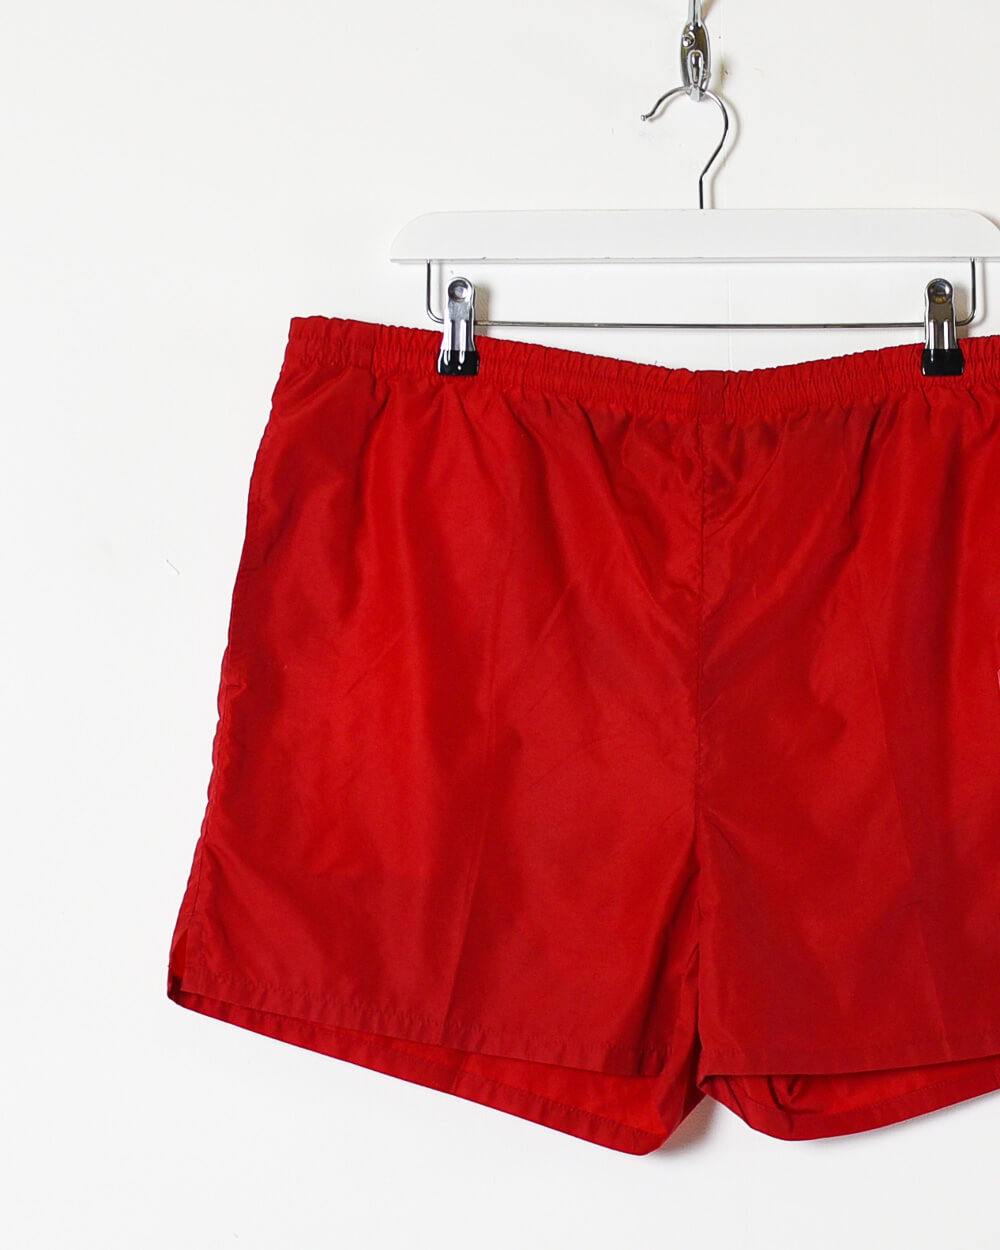 Red Ralph Lauren Polo Sport Shorts - Large